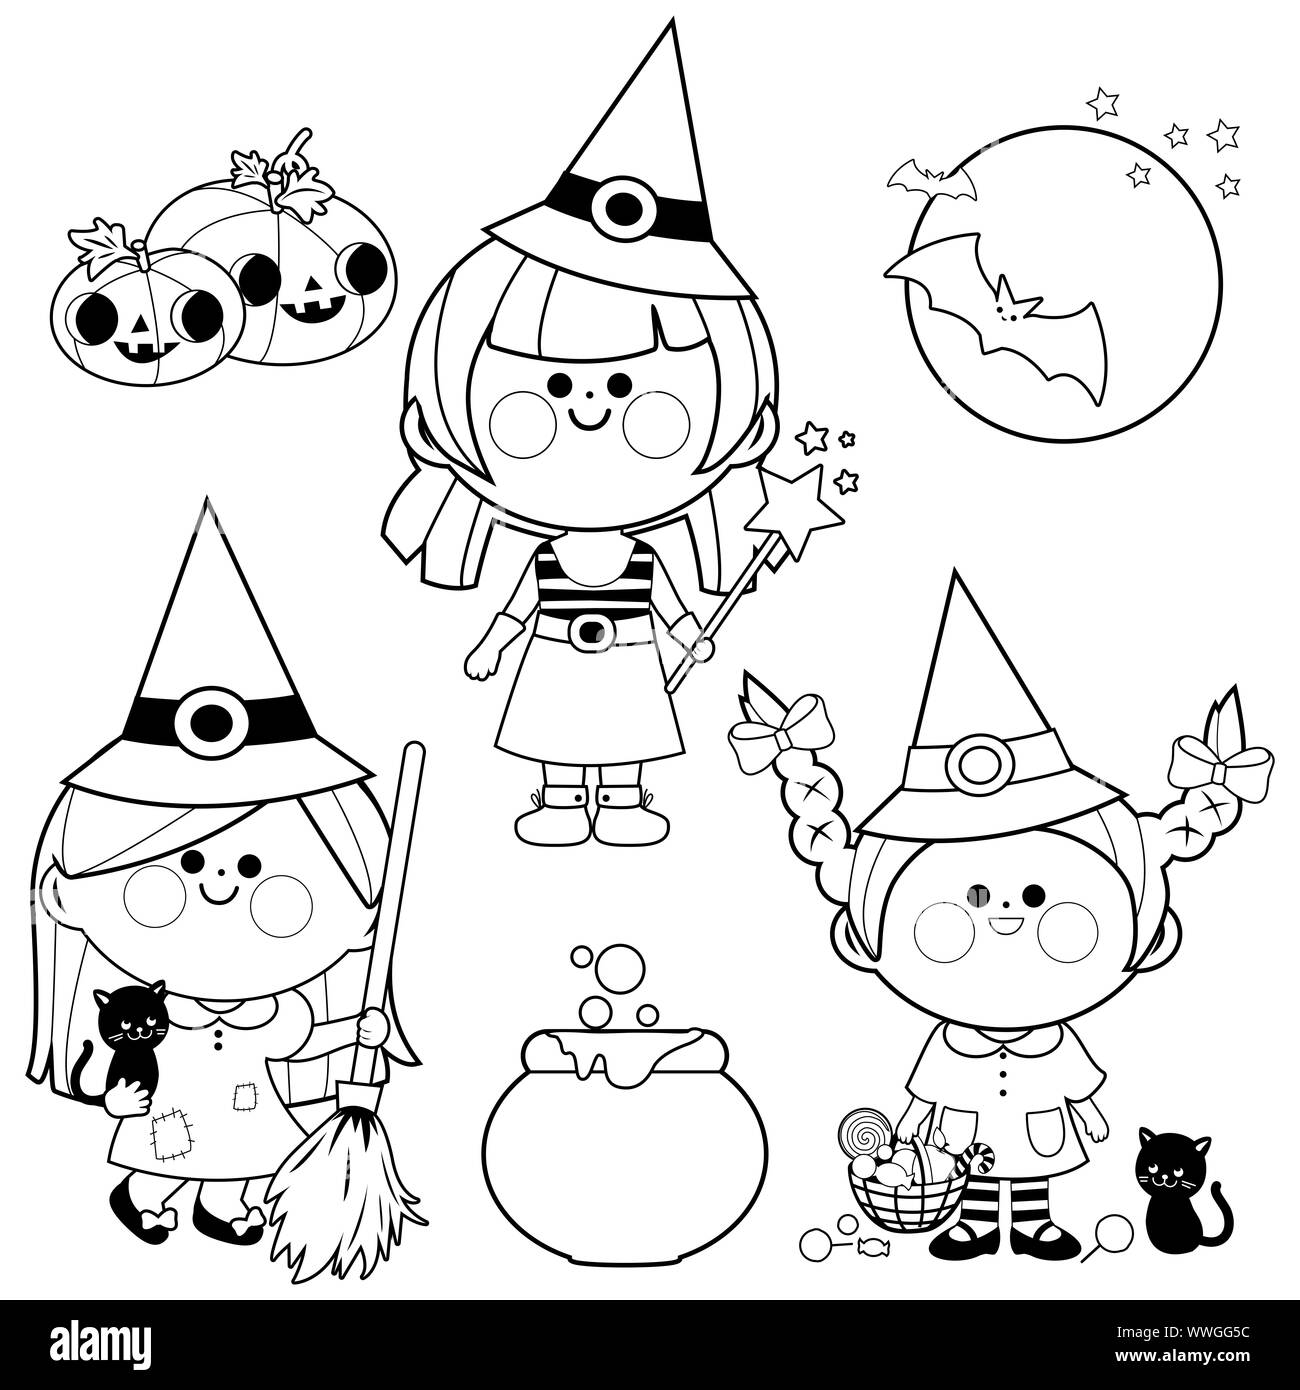 Girls dressed in witch costumes, treats, candy and other Halloween objects. Black and white illustration. Stock Photo